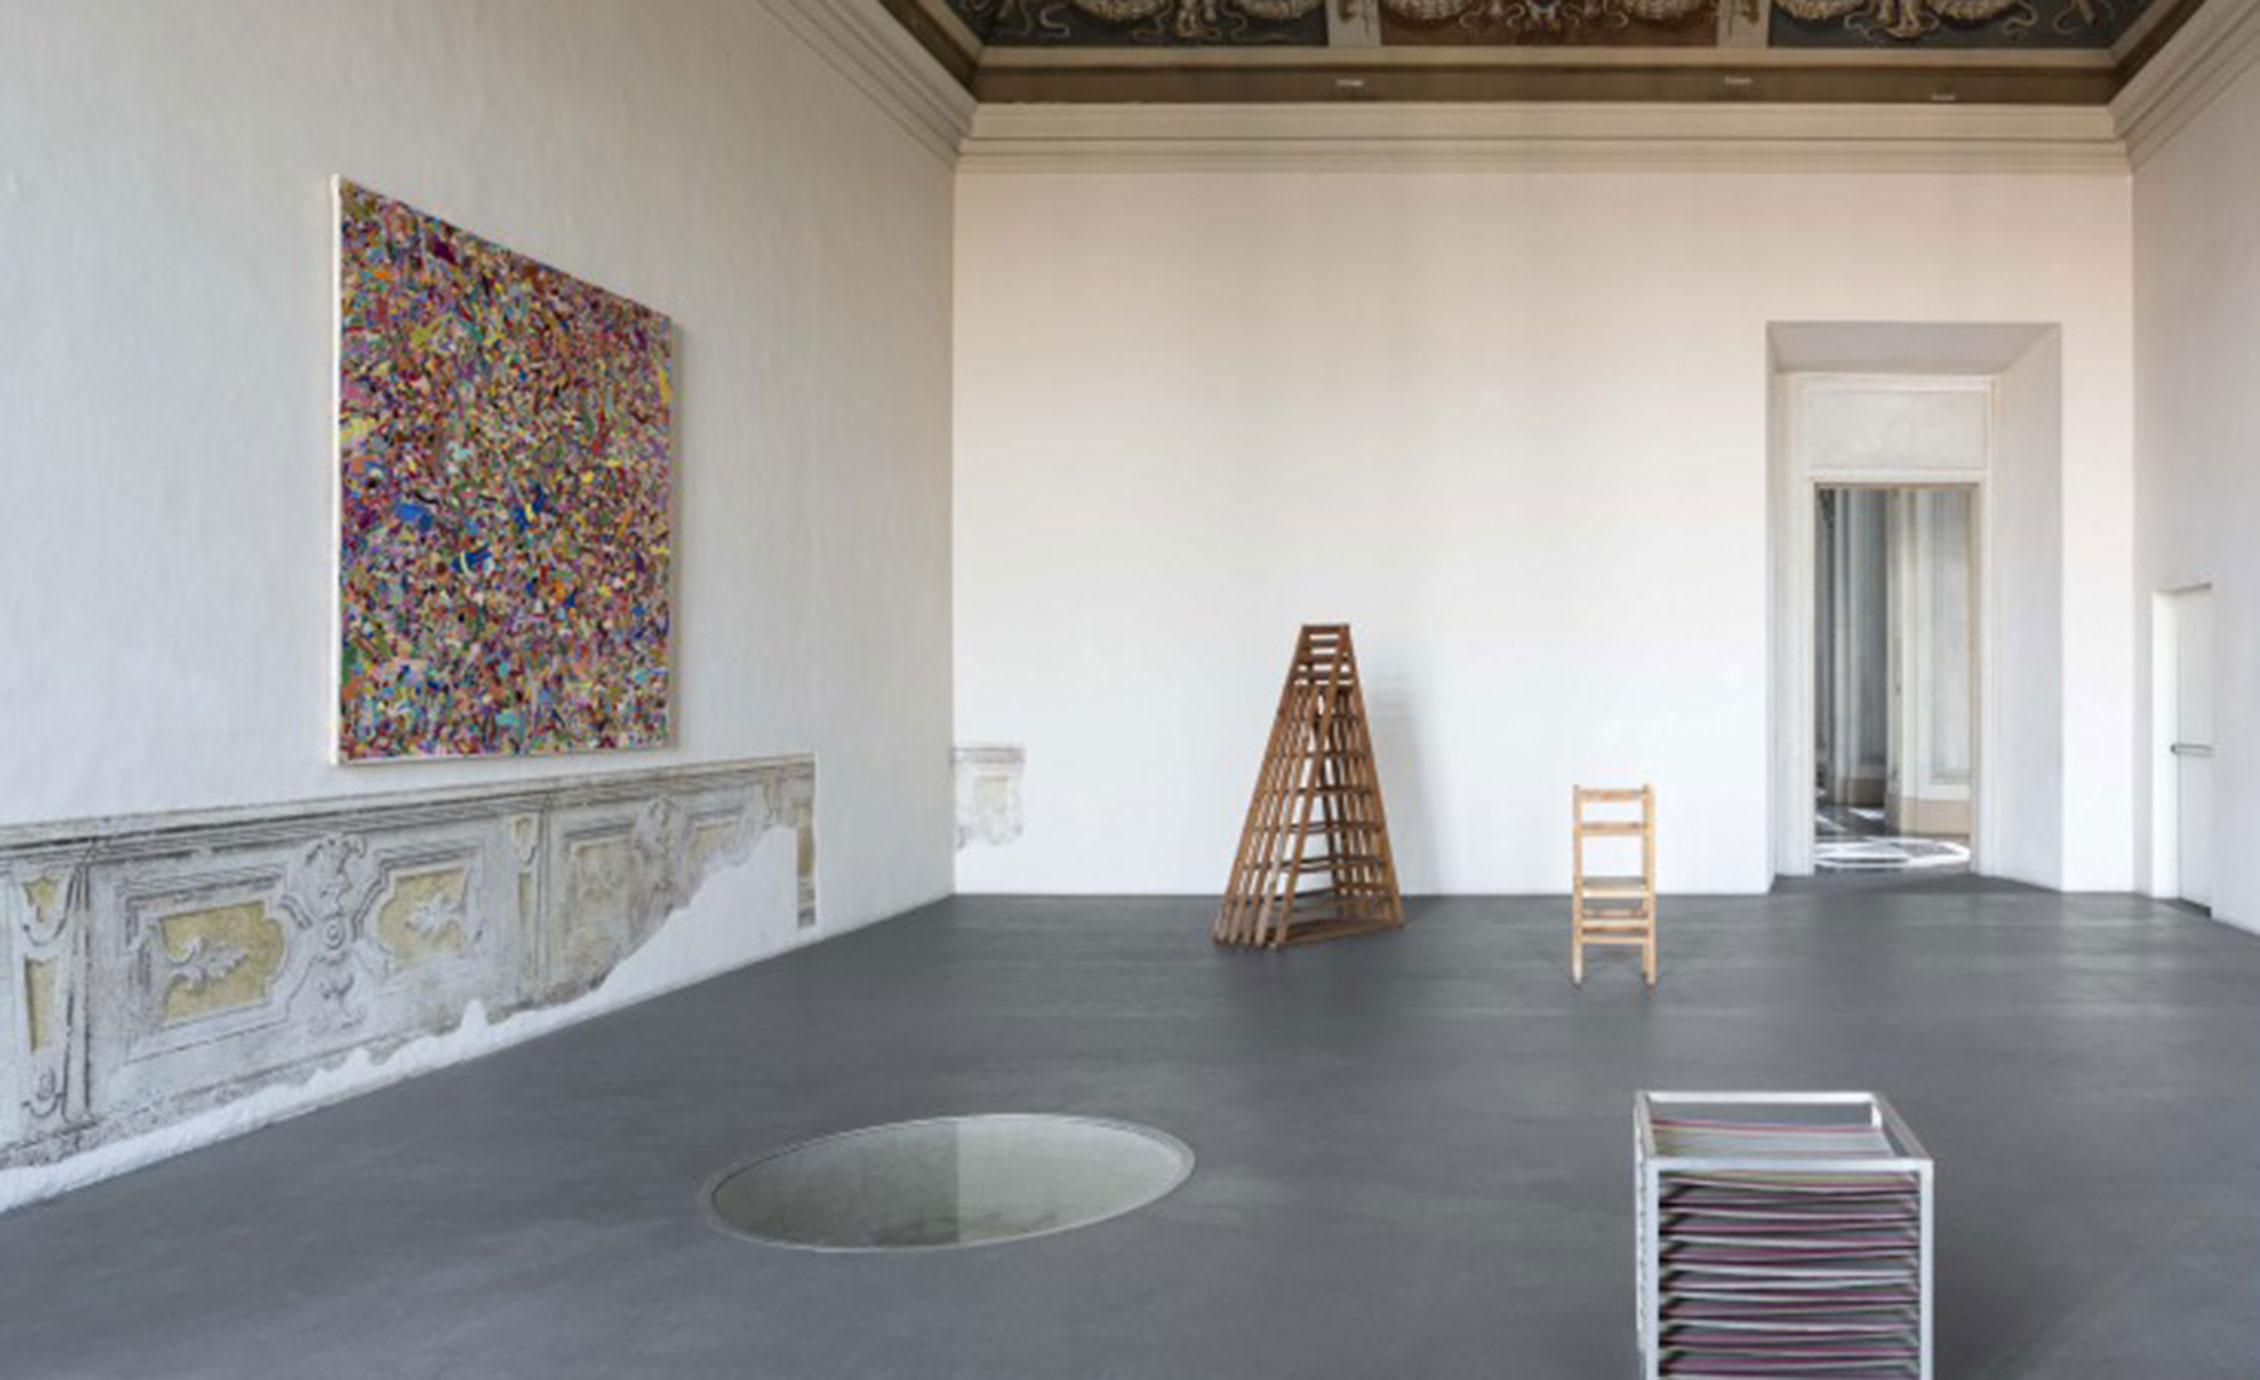 The Castello di Rivoli's gallery dedicated to Italian artist Alighieri Boetti featuring (from left to right) Tutto (Everything), 1987-88, Scala (Ladder), 1966, and Zig-Zag, 1966.